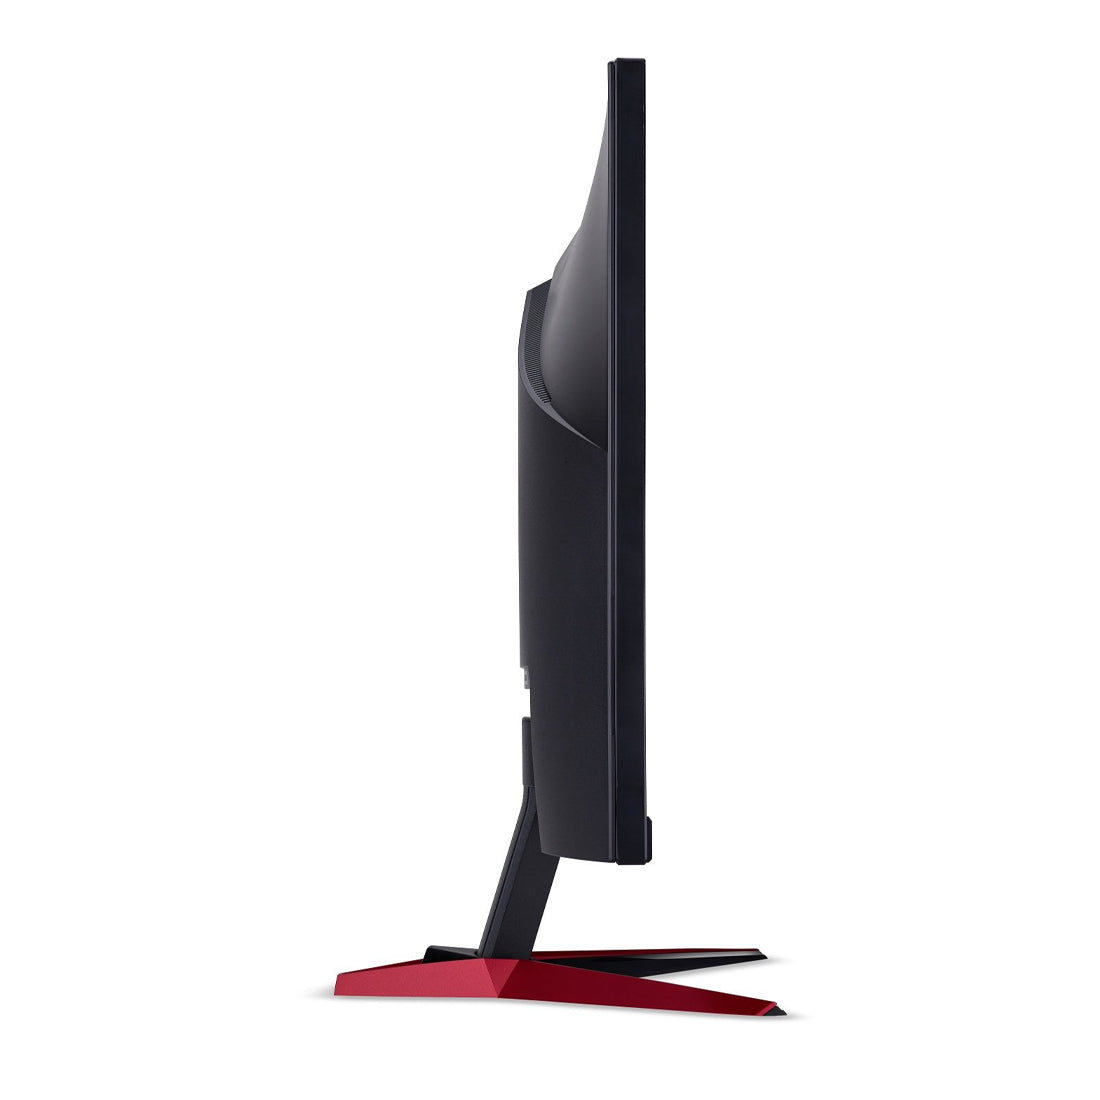 [RePacked] Acer VG240Y 24-Inch Full HD IPS Monitor with 1ms Response Time and Dual 2W Speakers